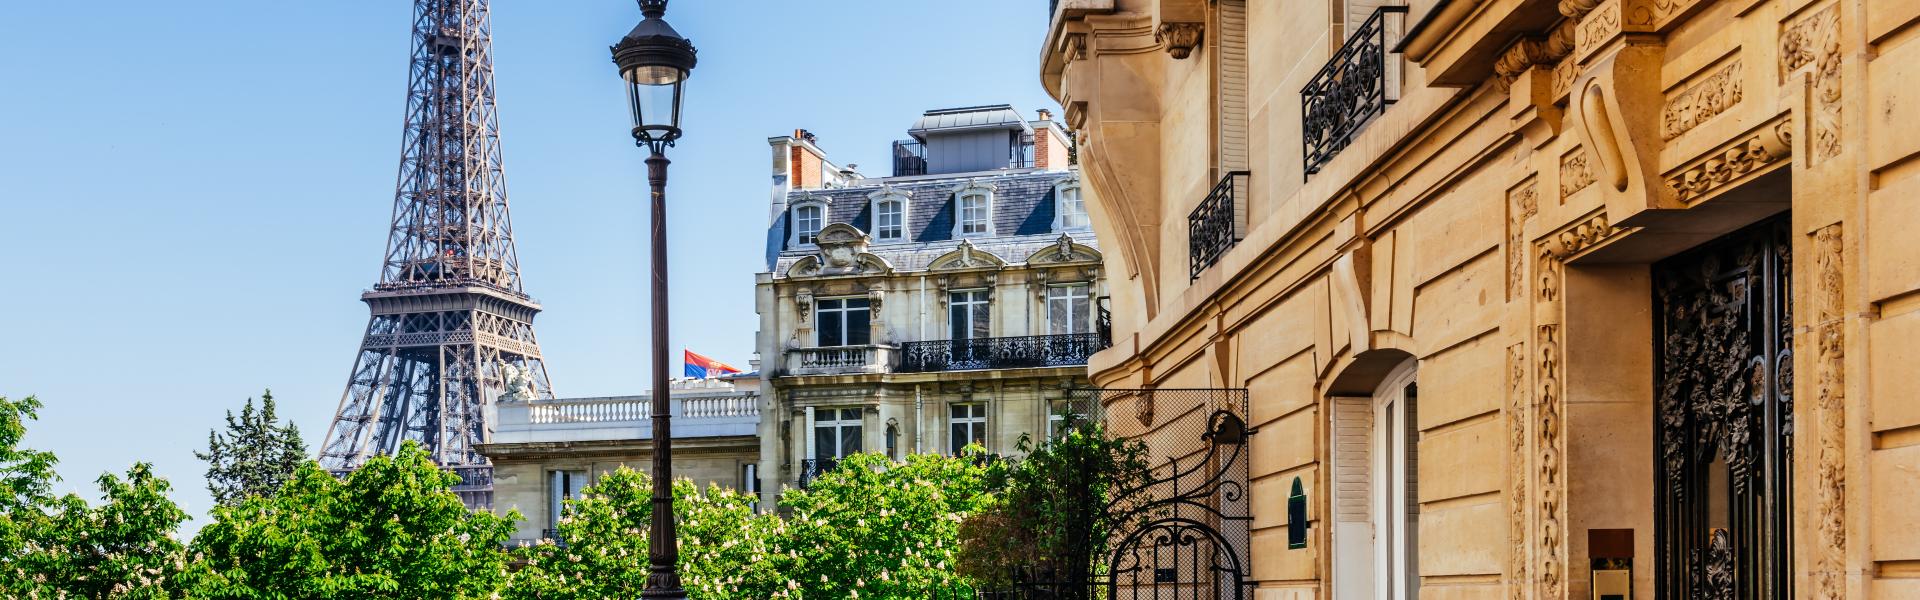 Discover the best rooms and rentals for your city break in Paris - Casamundo